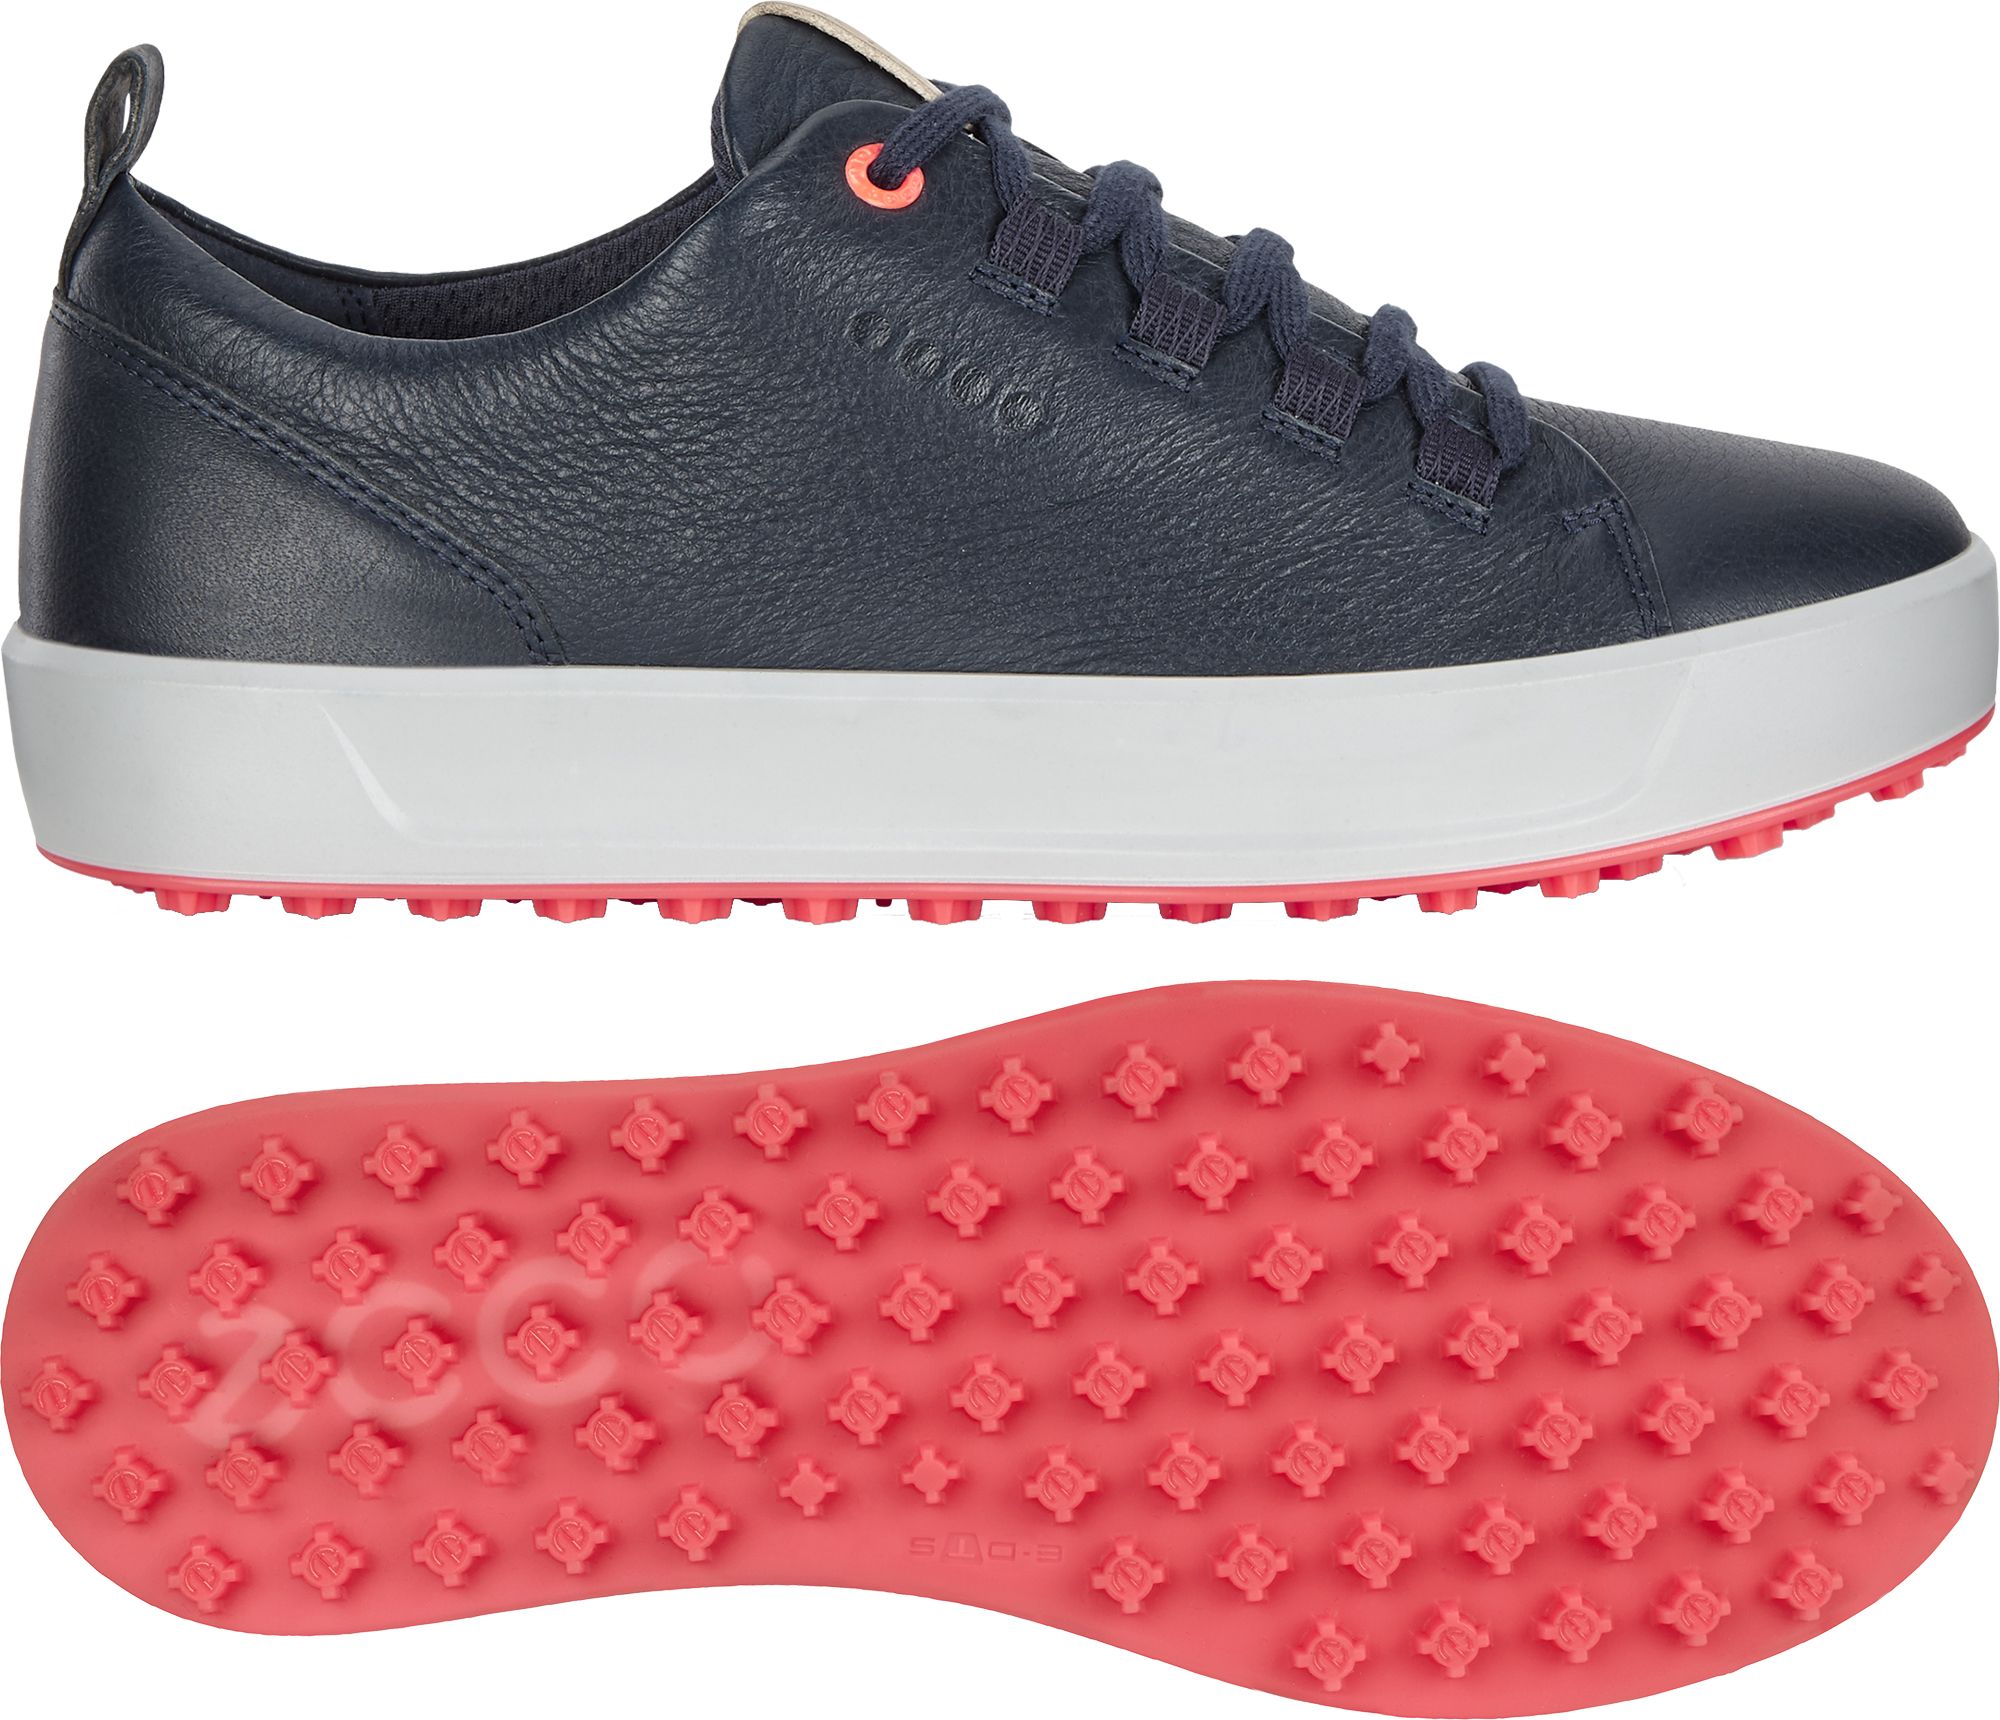 Women's Golf Shoes | Best Price Guarantee at DICK'S